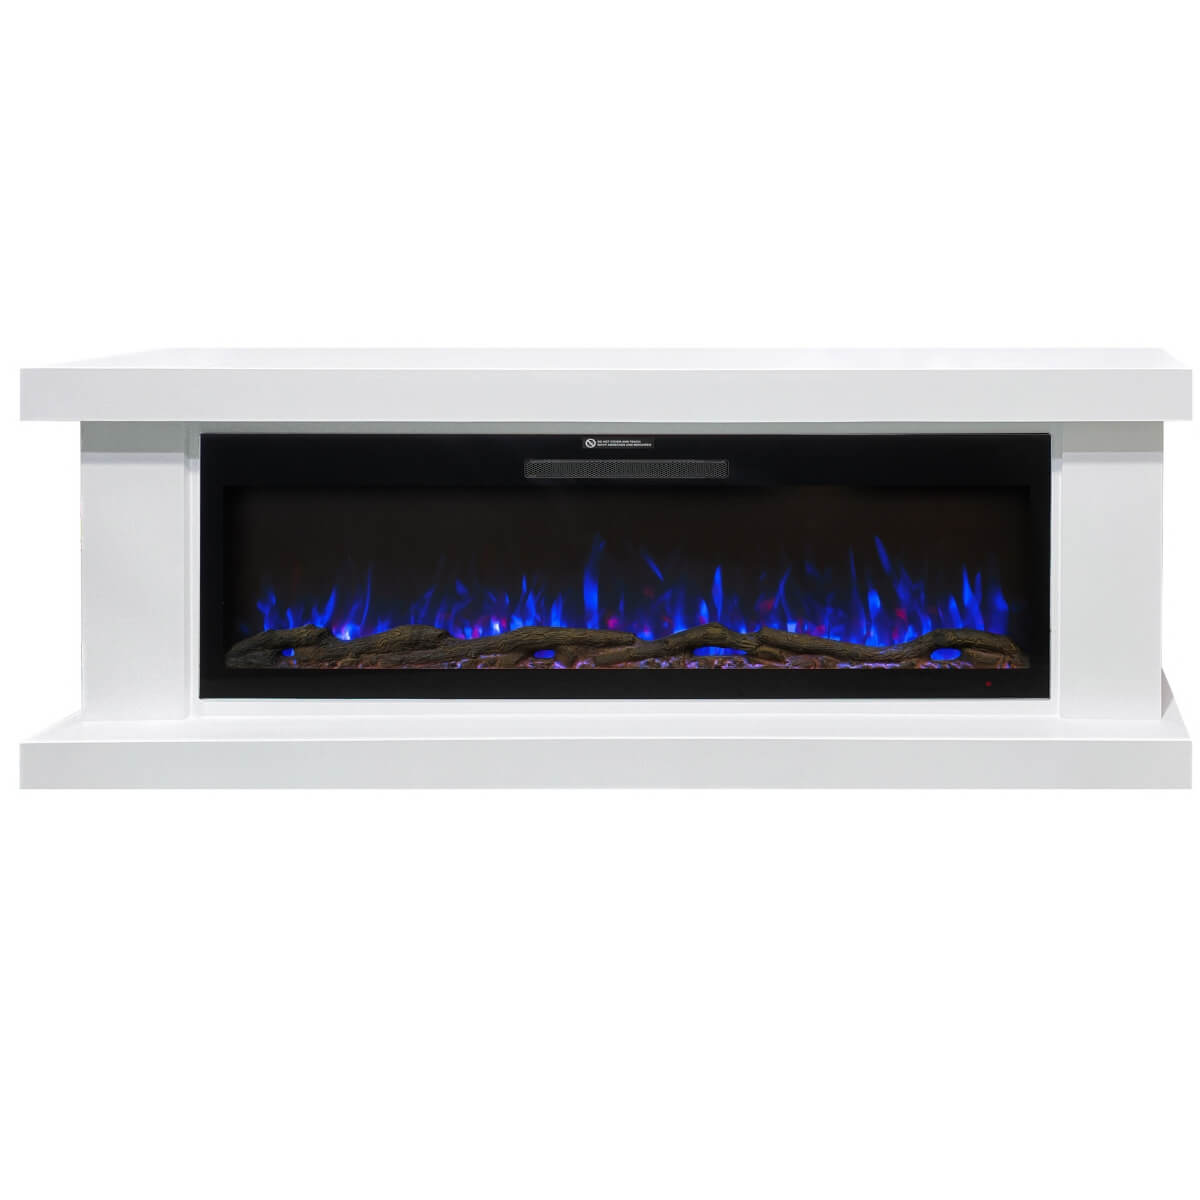 Premium Electric Fire Suite with Mantel-2 Meters (Eclipse Home)